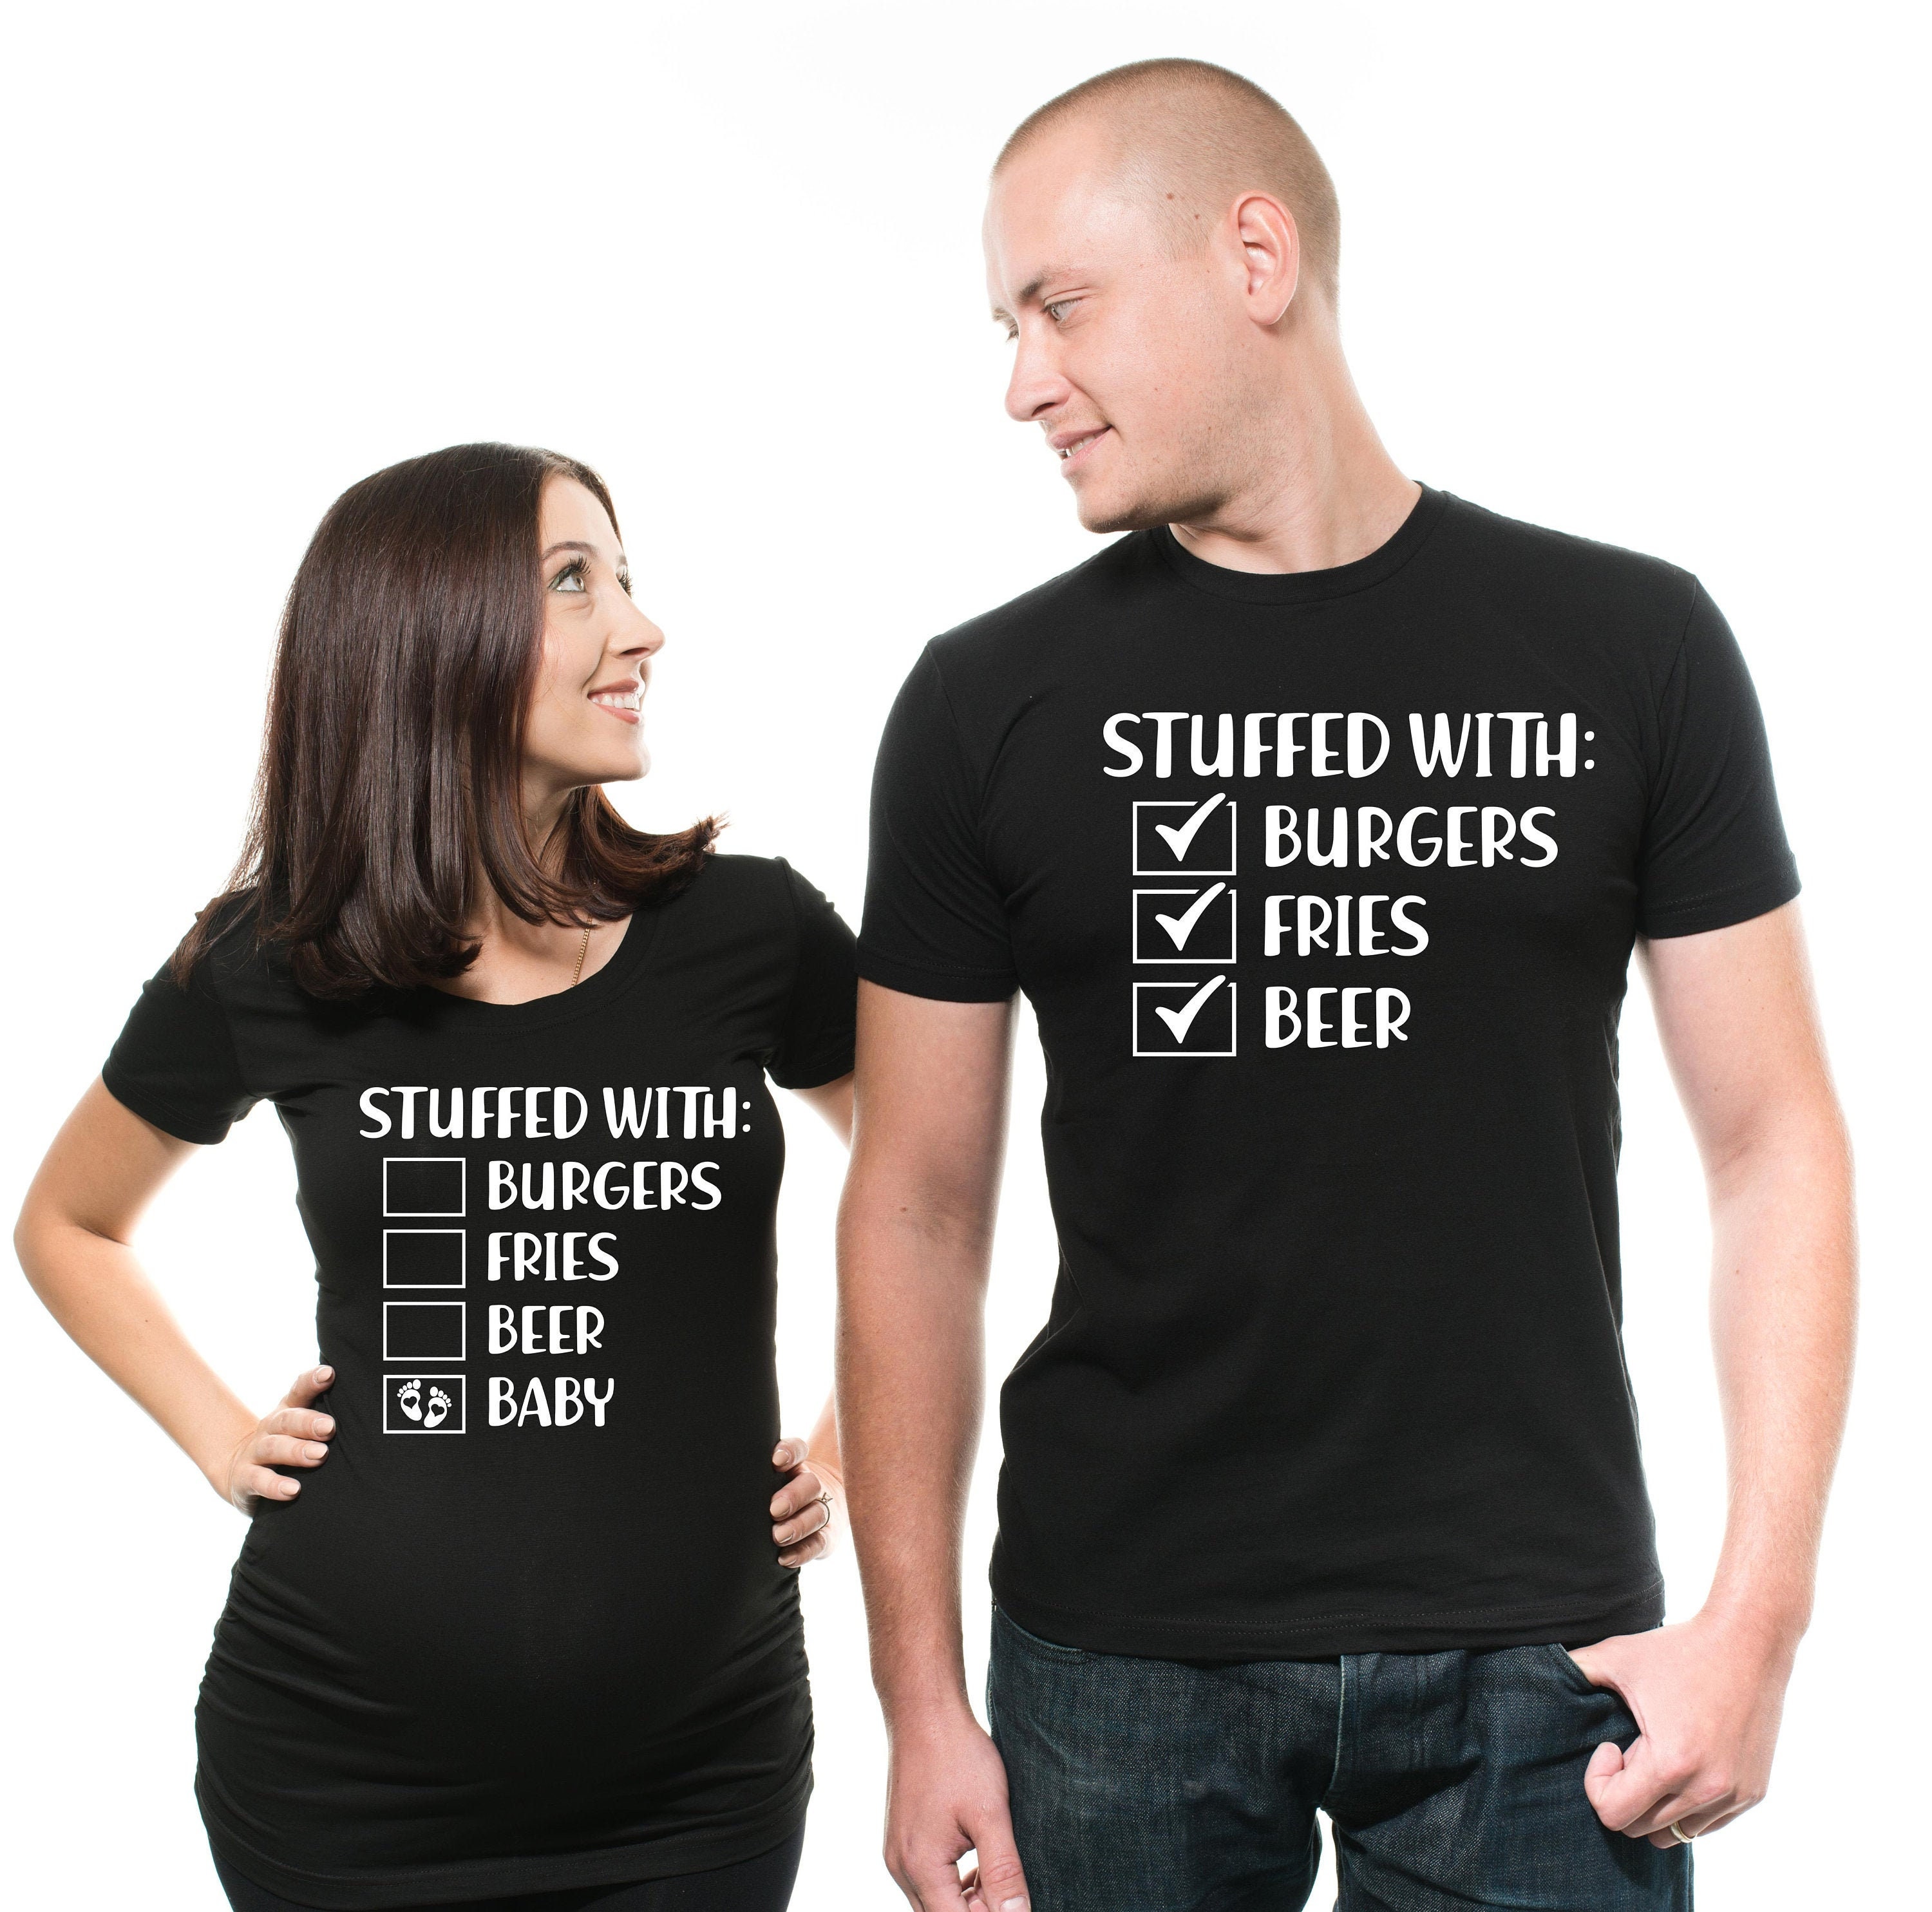 yummytees Pregnancy Couple Matching T-shirts Funny Dad Maternity Birth Announcement Baby Shower Cool Photo Shoot Tee Shirts